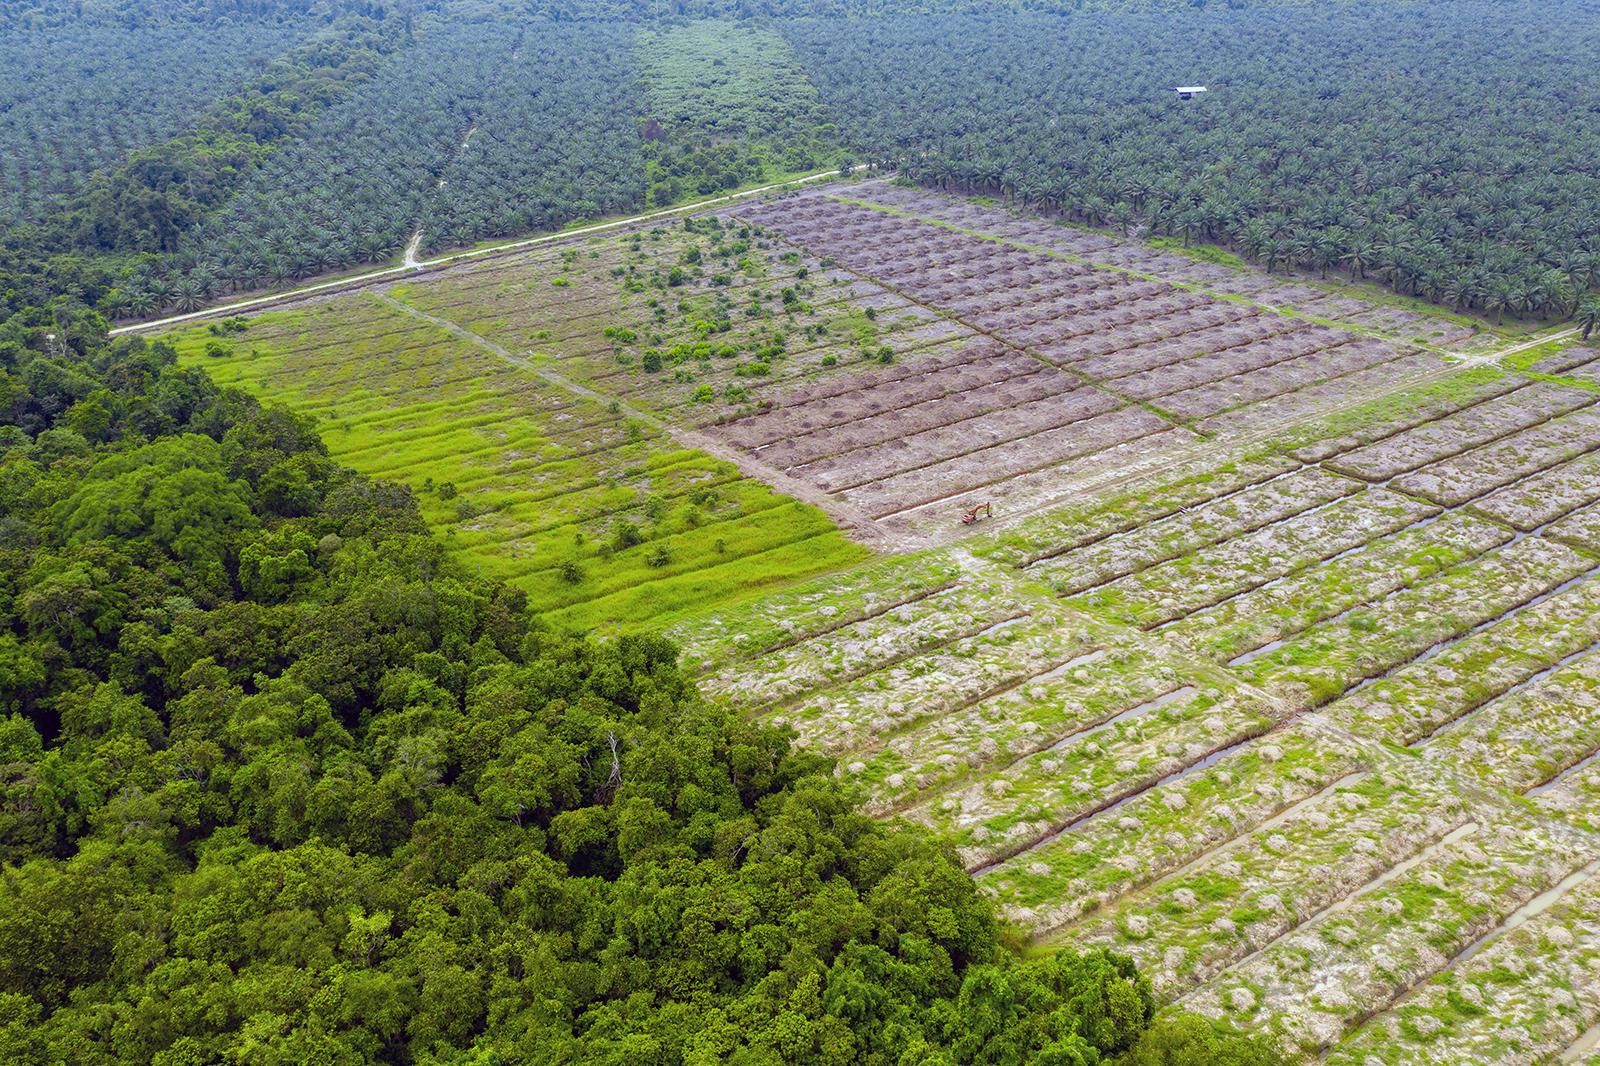 Rainforests are not being renewed and usually, the land is being given over to other uses. In Borneo, the rainforest has been cleared for a palm oil plantation. Photo: Shutterstock